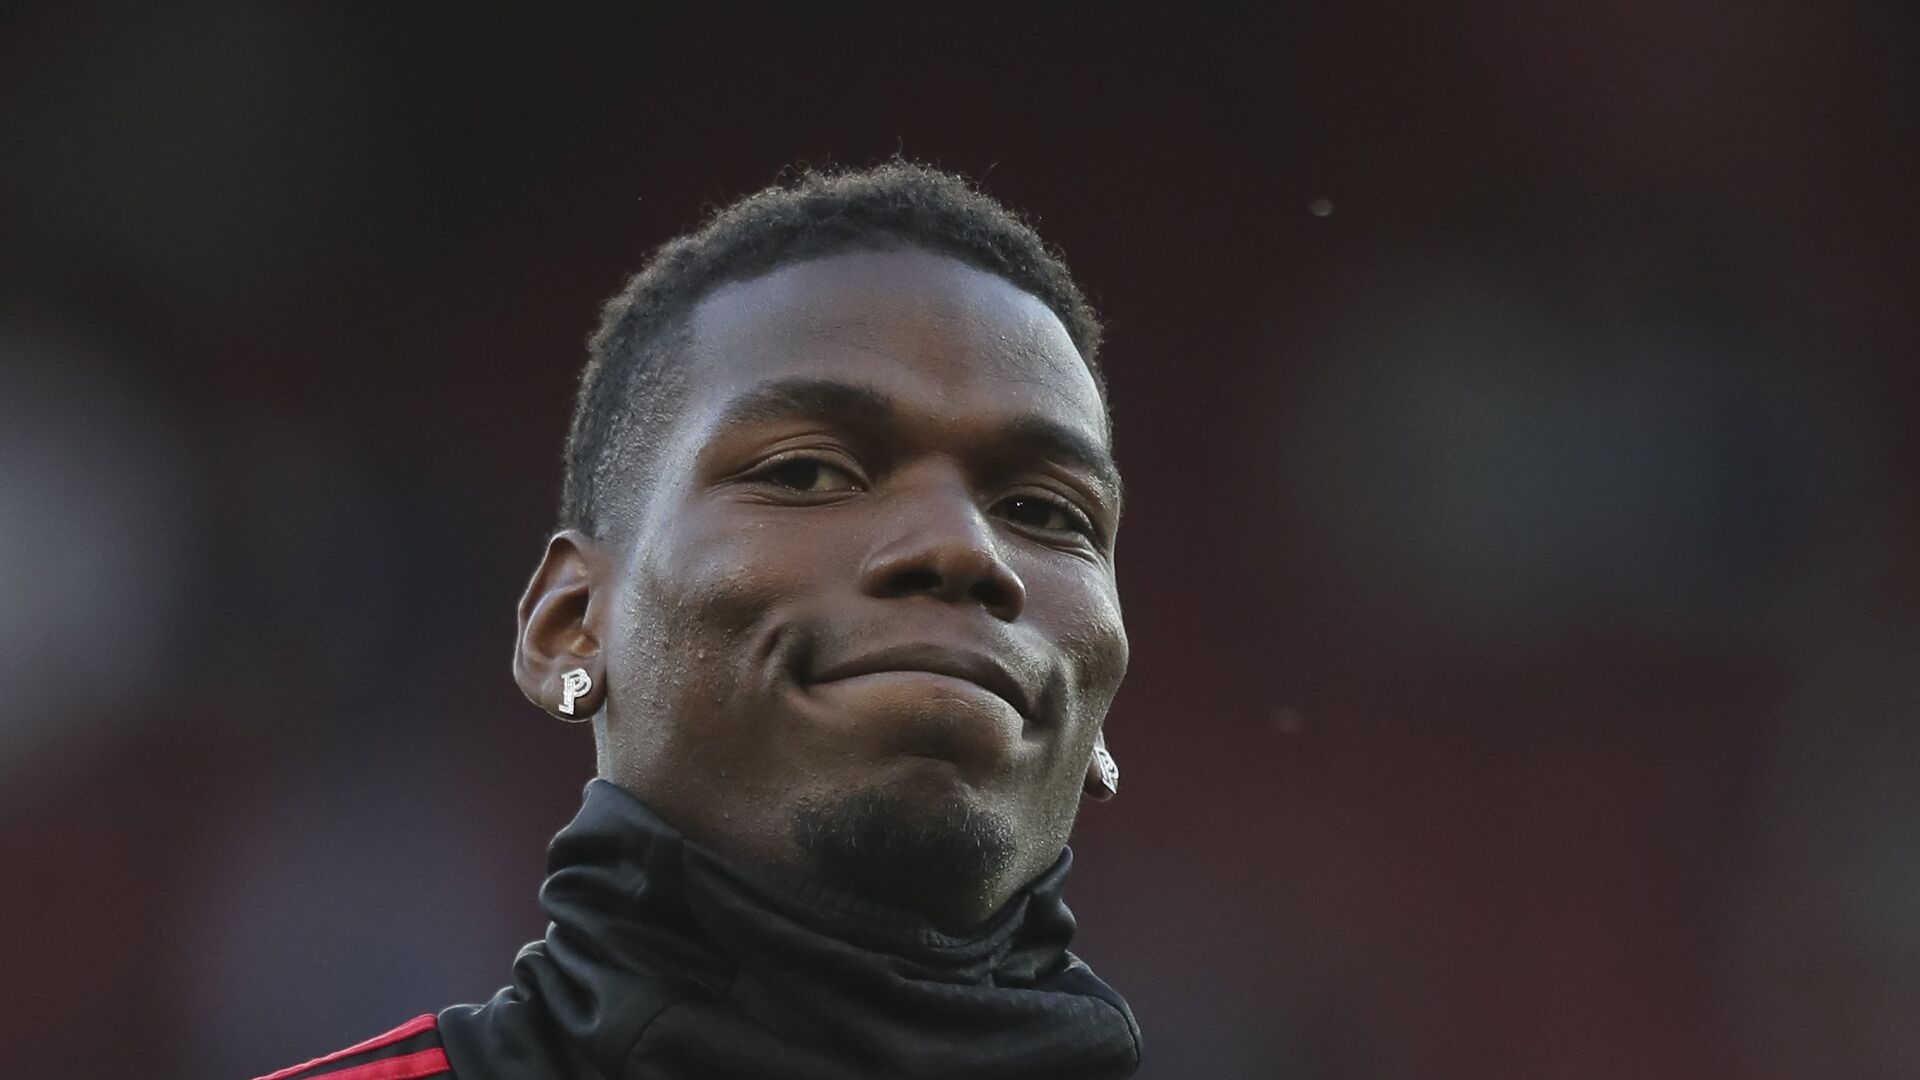 Manchester United's Paul Pogba applauds the fans as he takes part in the warm up prior to the start of the English Premier League soccer match between Manchester United and Leicester City at Old Trafford, in Manchester, England, Friday, Aug. 10, 2018 - اسپوتنیک افغانستان  , 1920, 12.06.2022